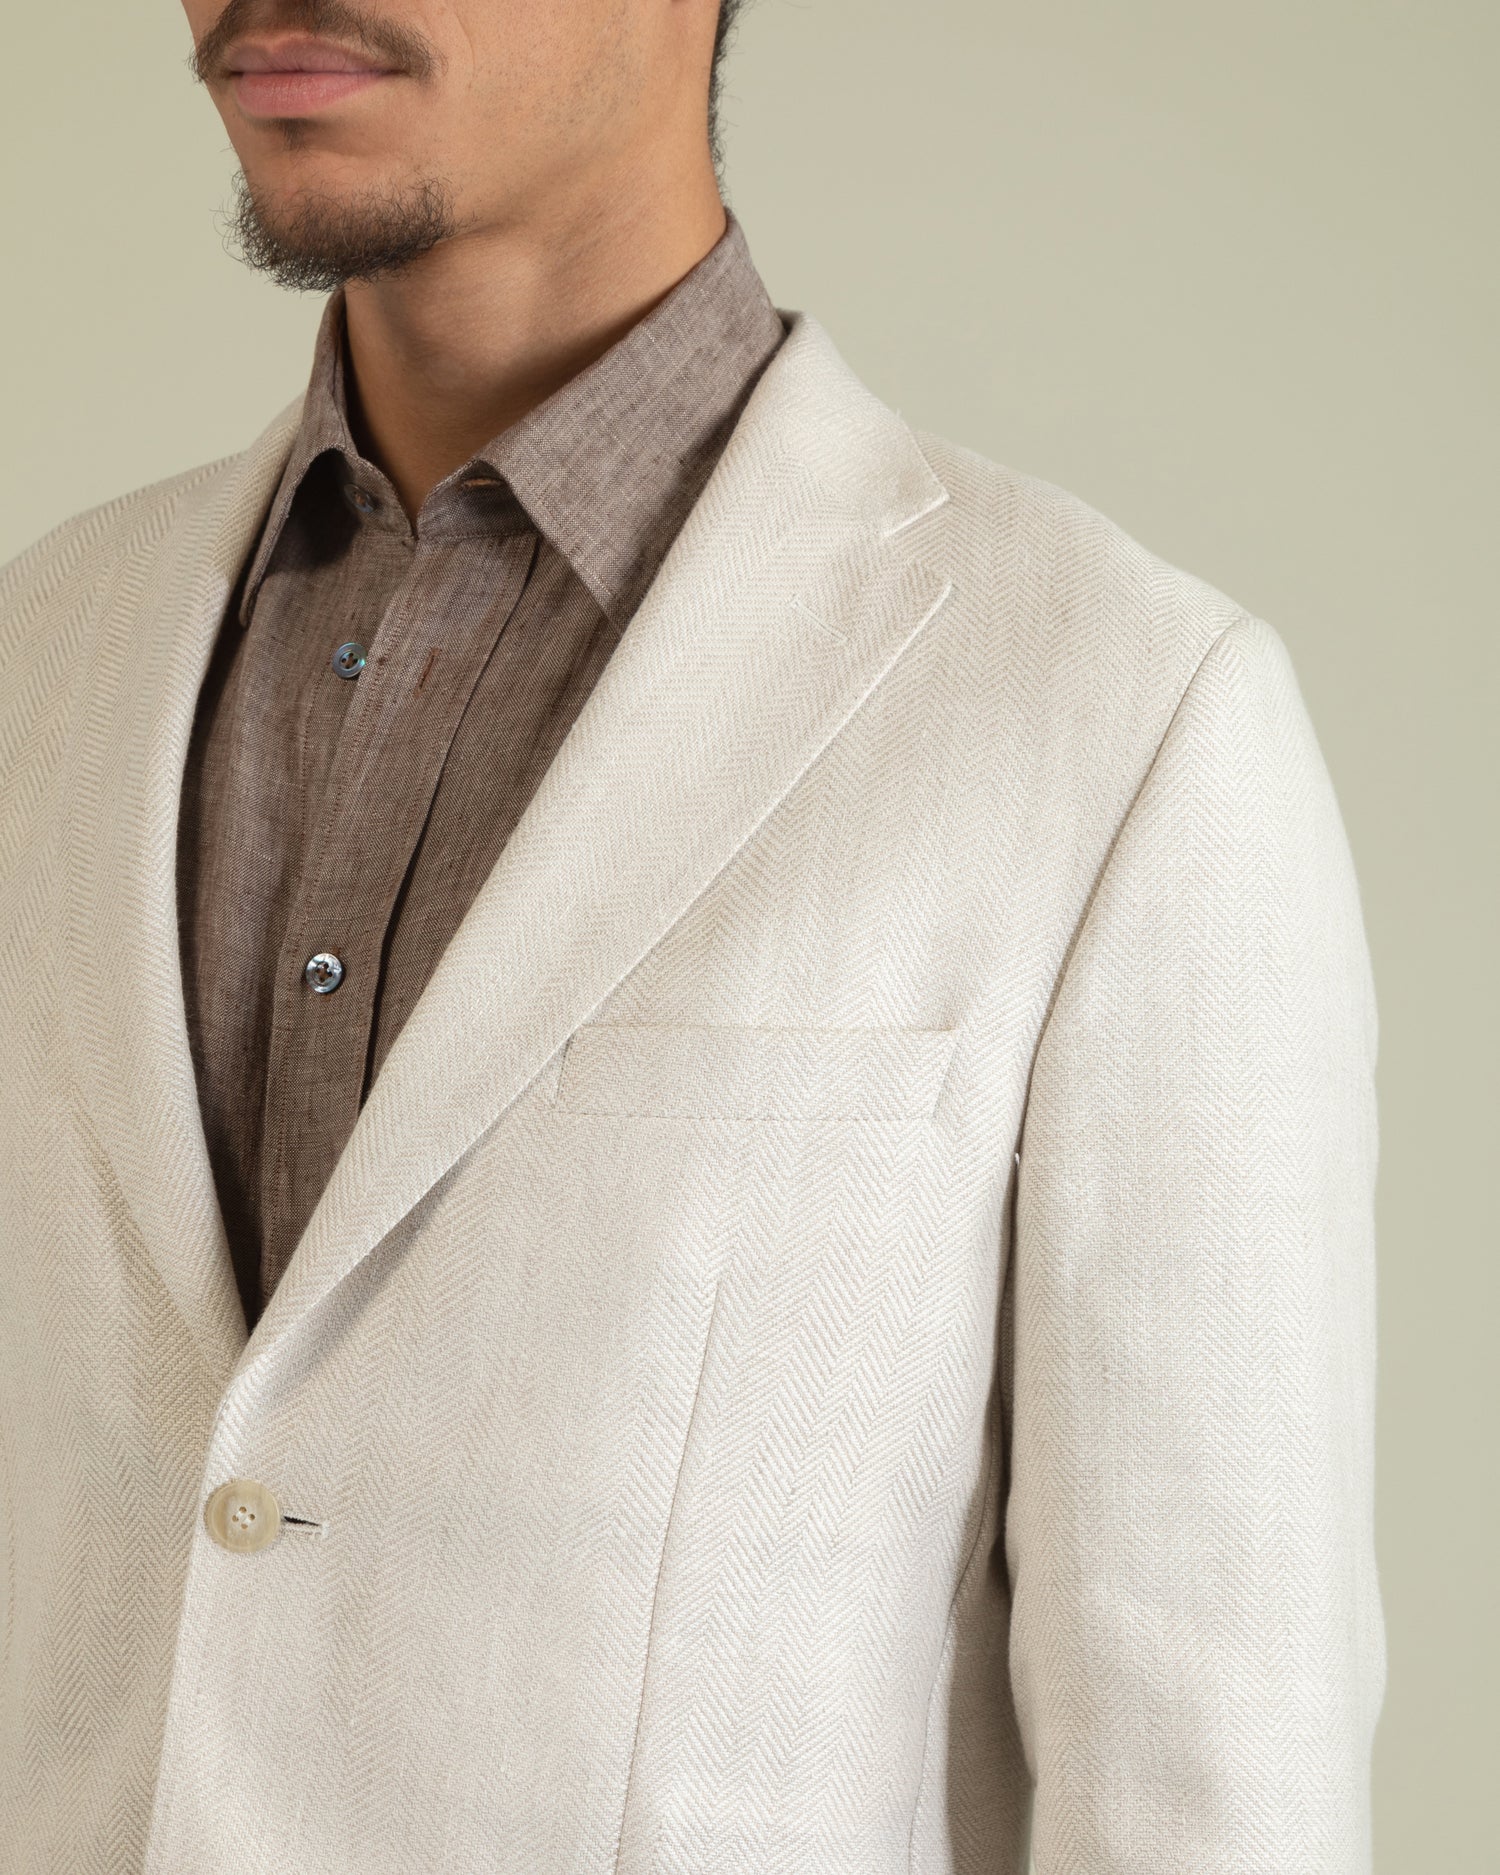 Casual Summer Jacket in Cream White (8624949461322)